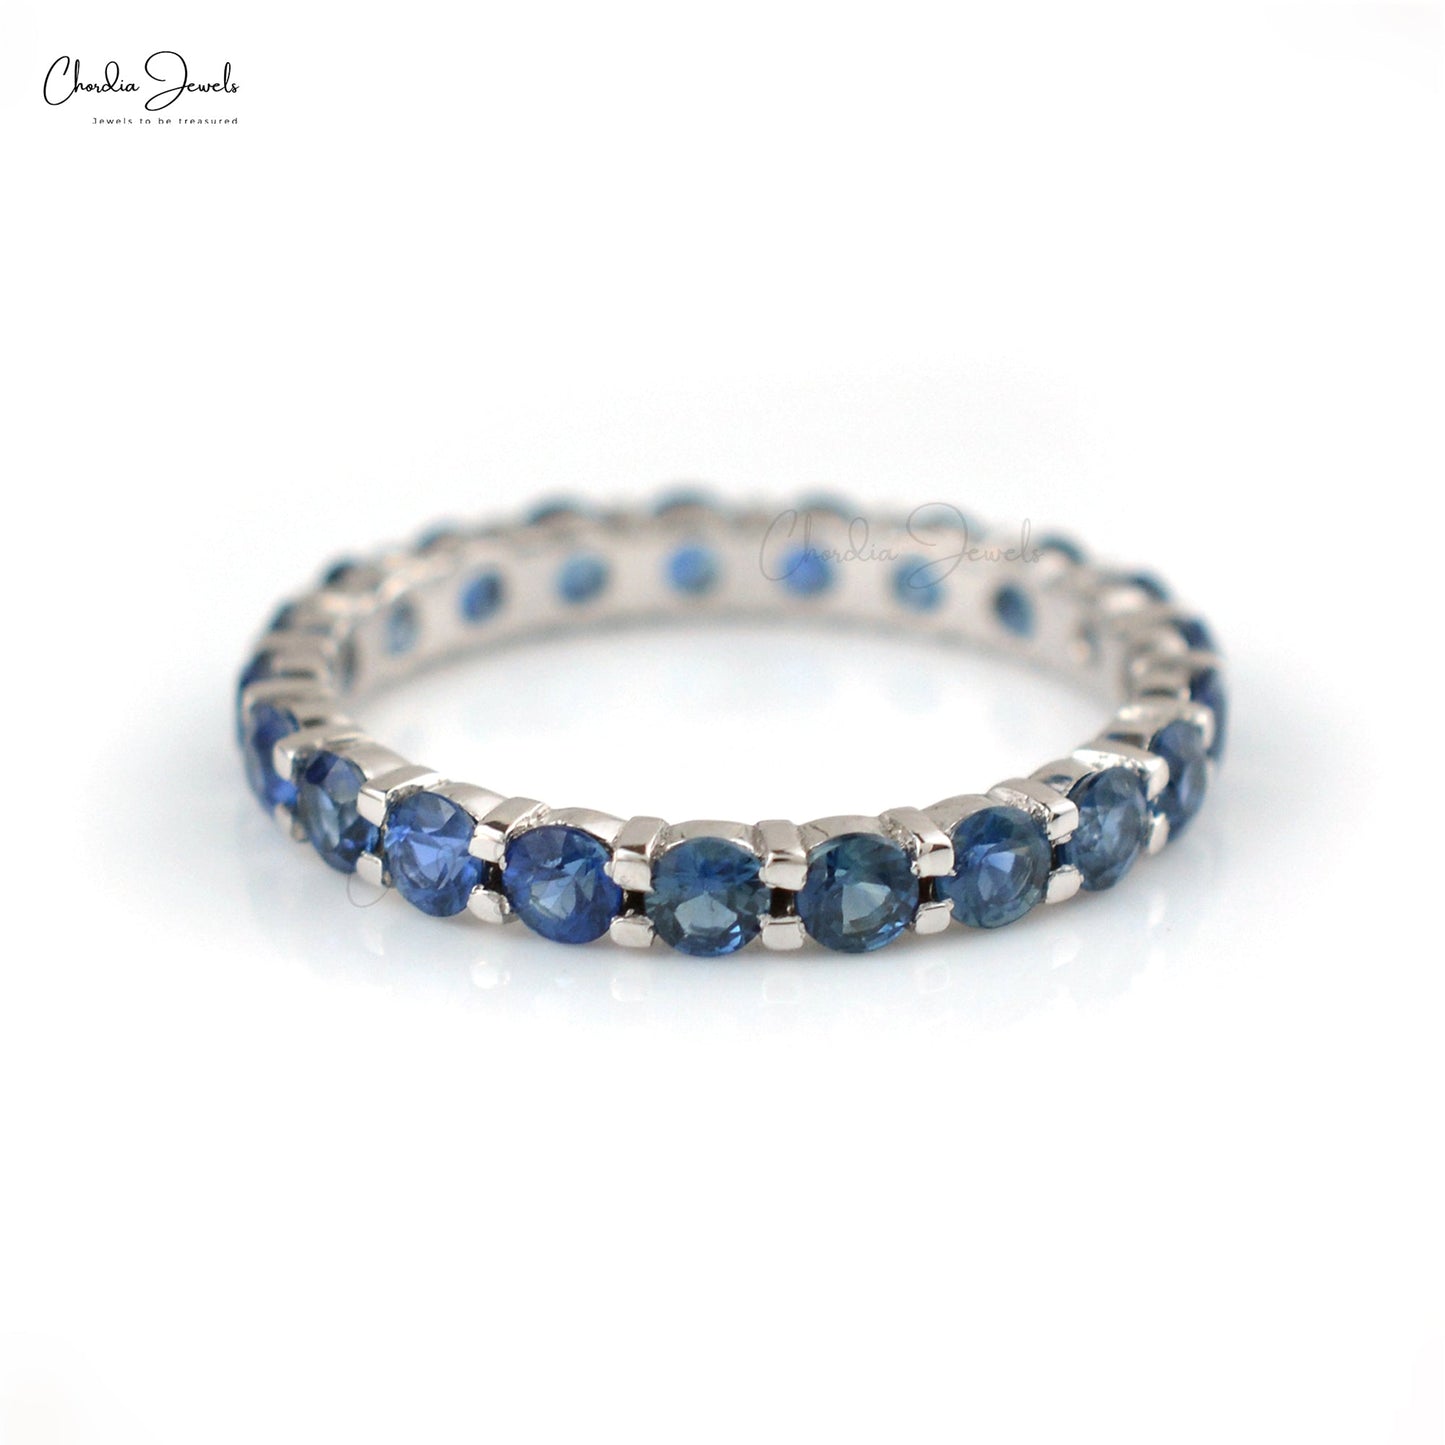 Load image into Gallery viewer, Natural Blue Sapphire Eternity Band 14k White Gold Eternity Band 2.5mm Round Gemstone Handmade Eternity Band Gift for Her
